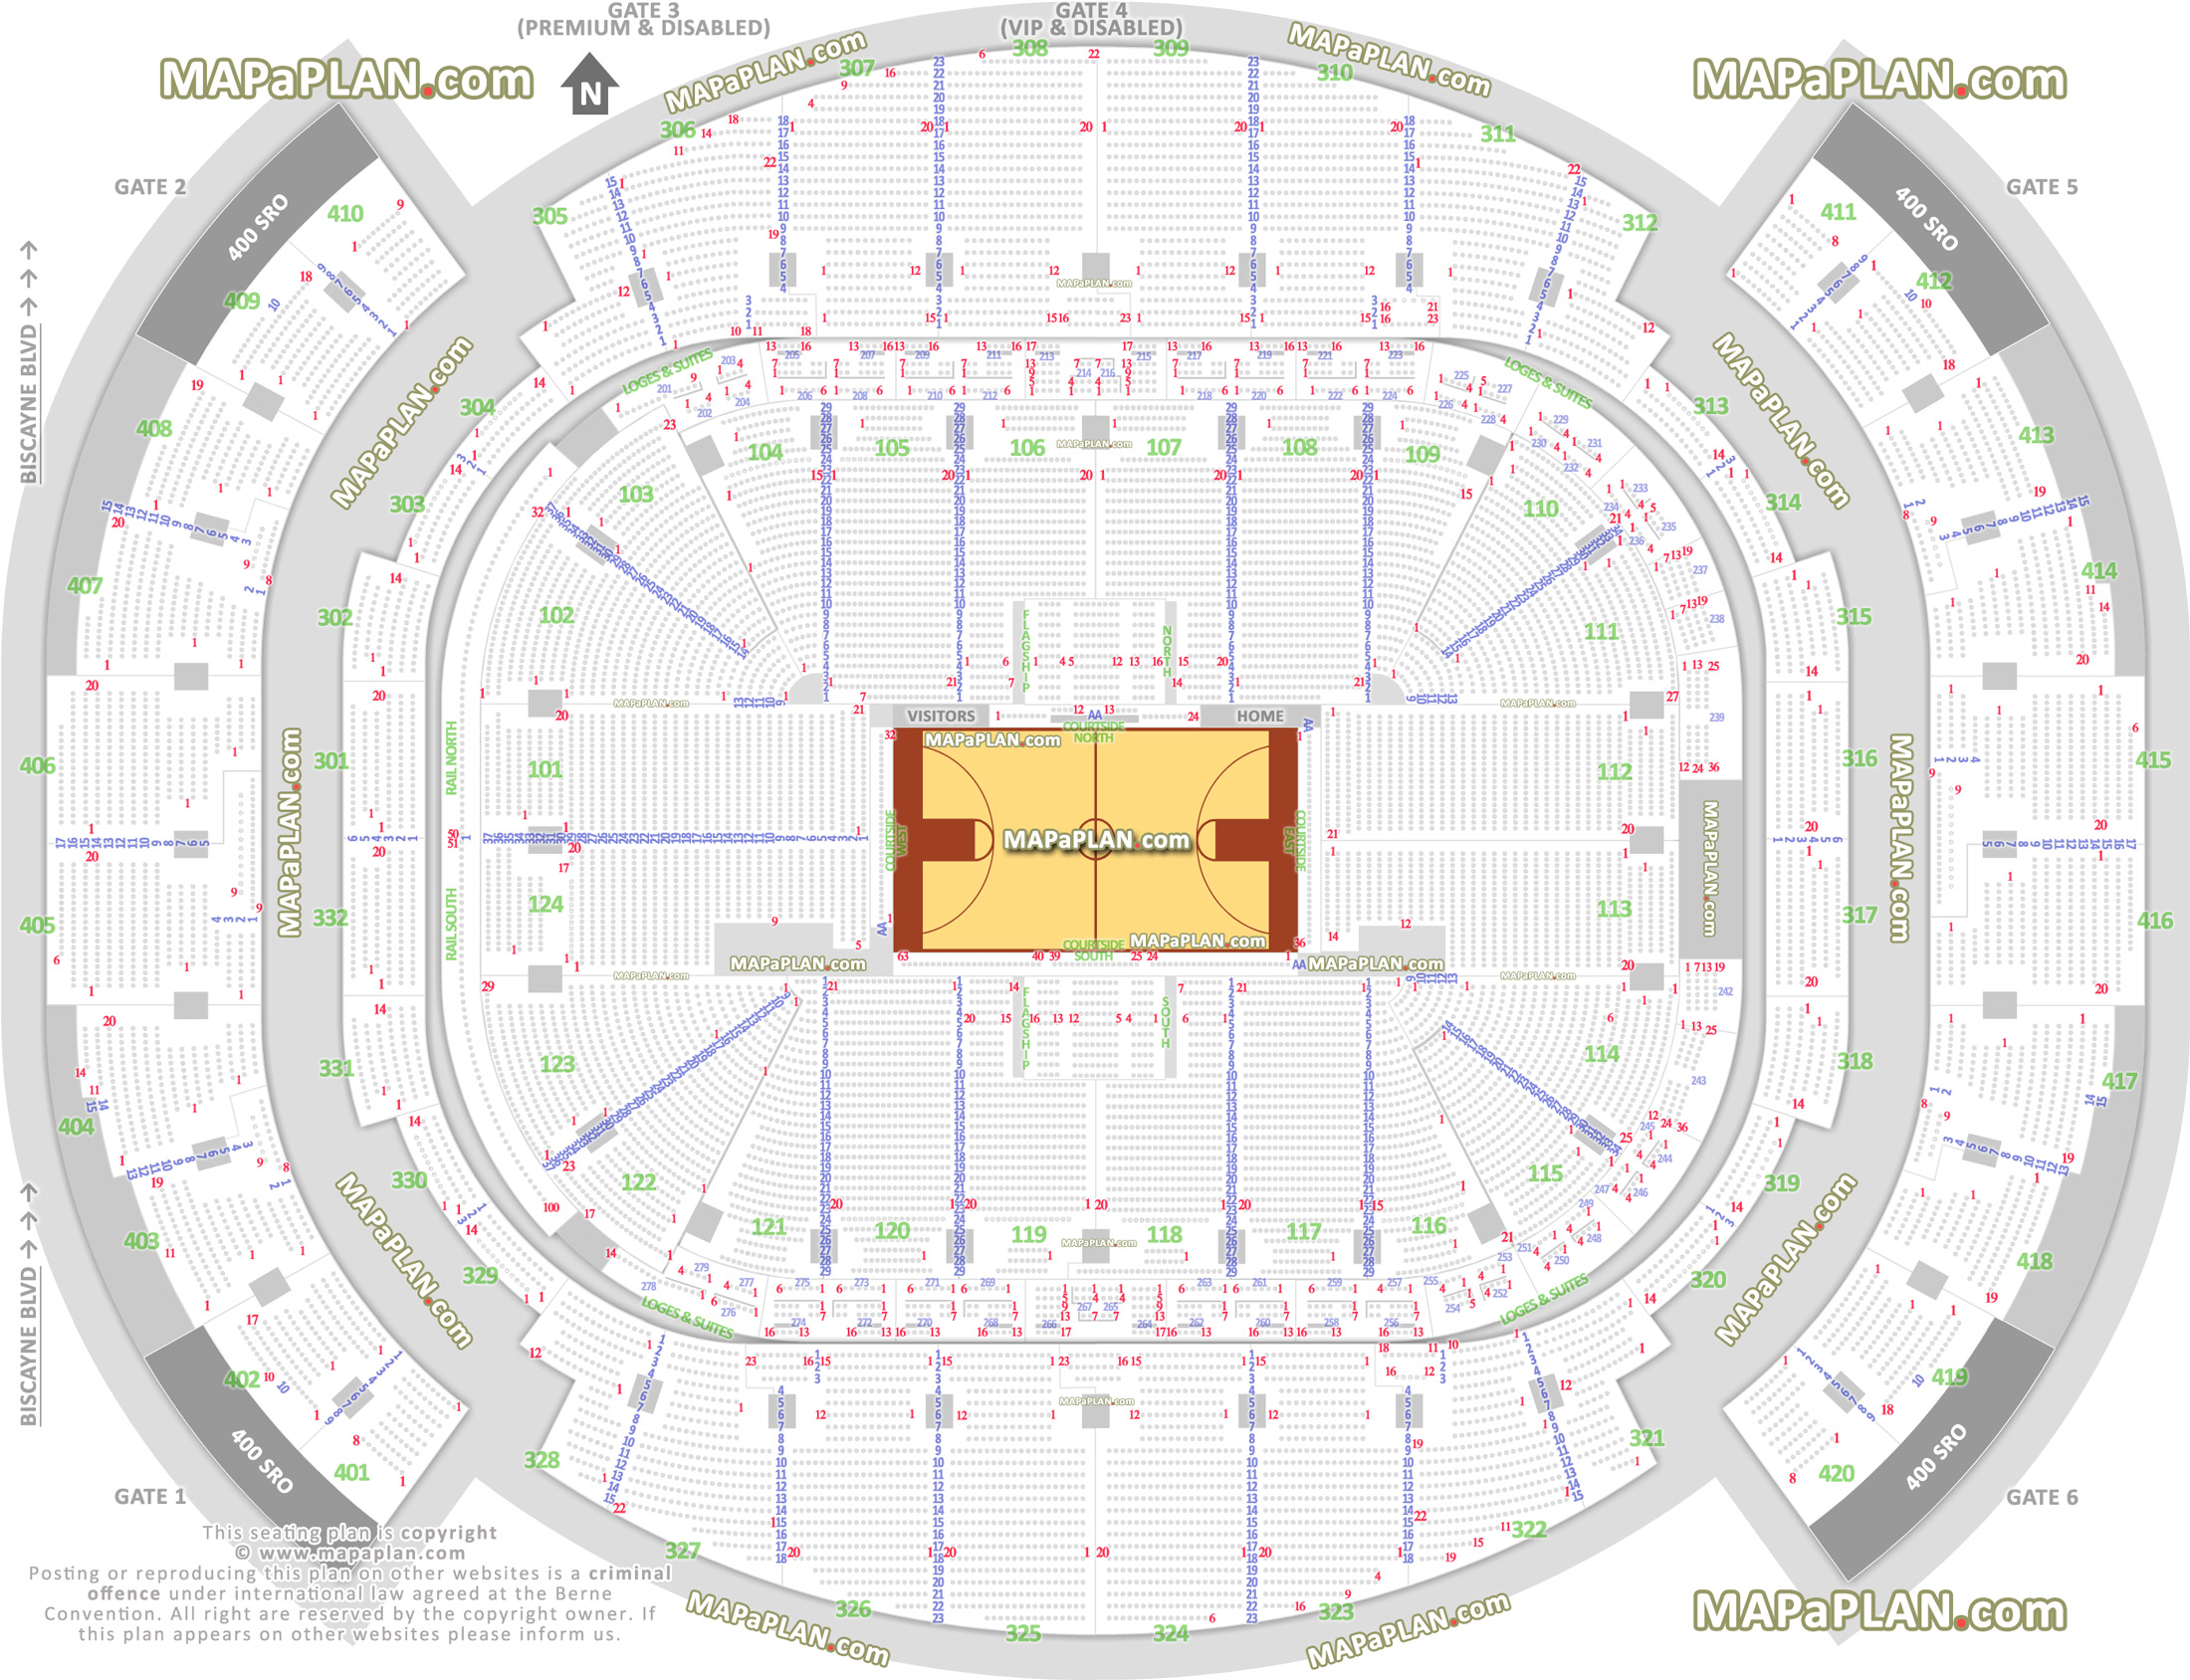 miami heat stadium nba basketball game court exact a3 center venue gate map individual find seat locator courtside home side area bench sideline baseline Miami Kaseya Center Arena seating chart